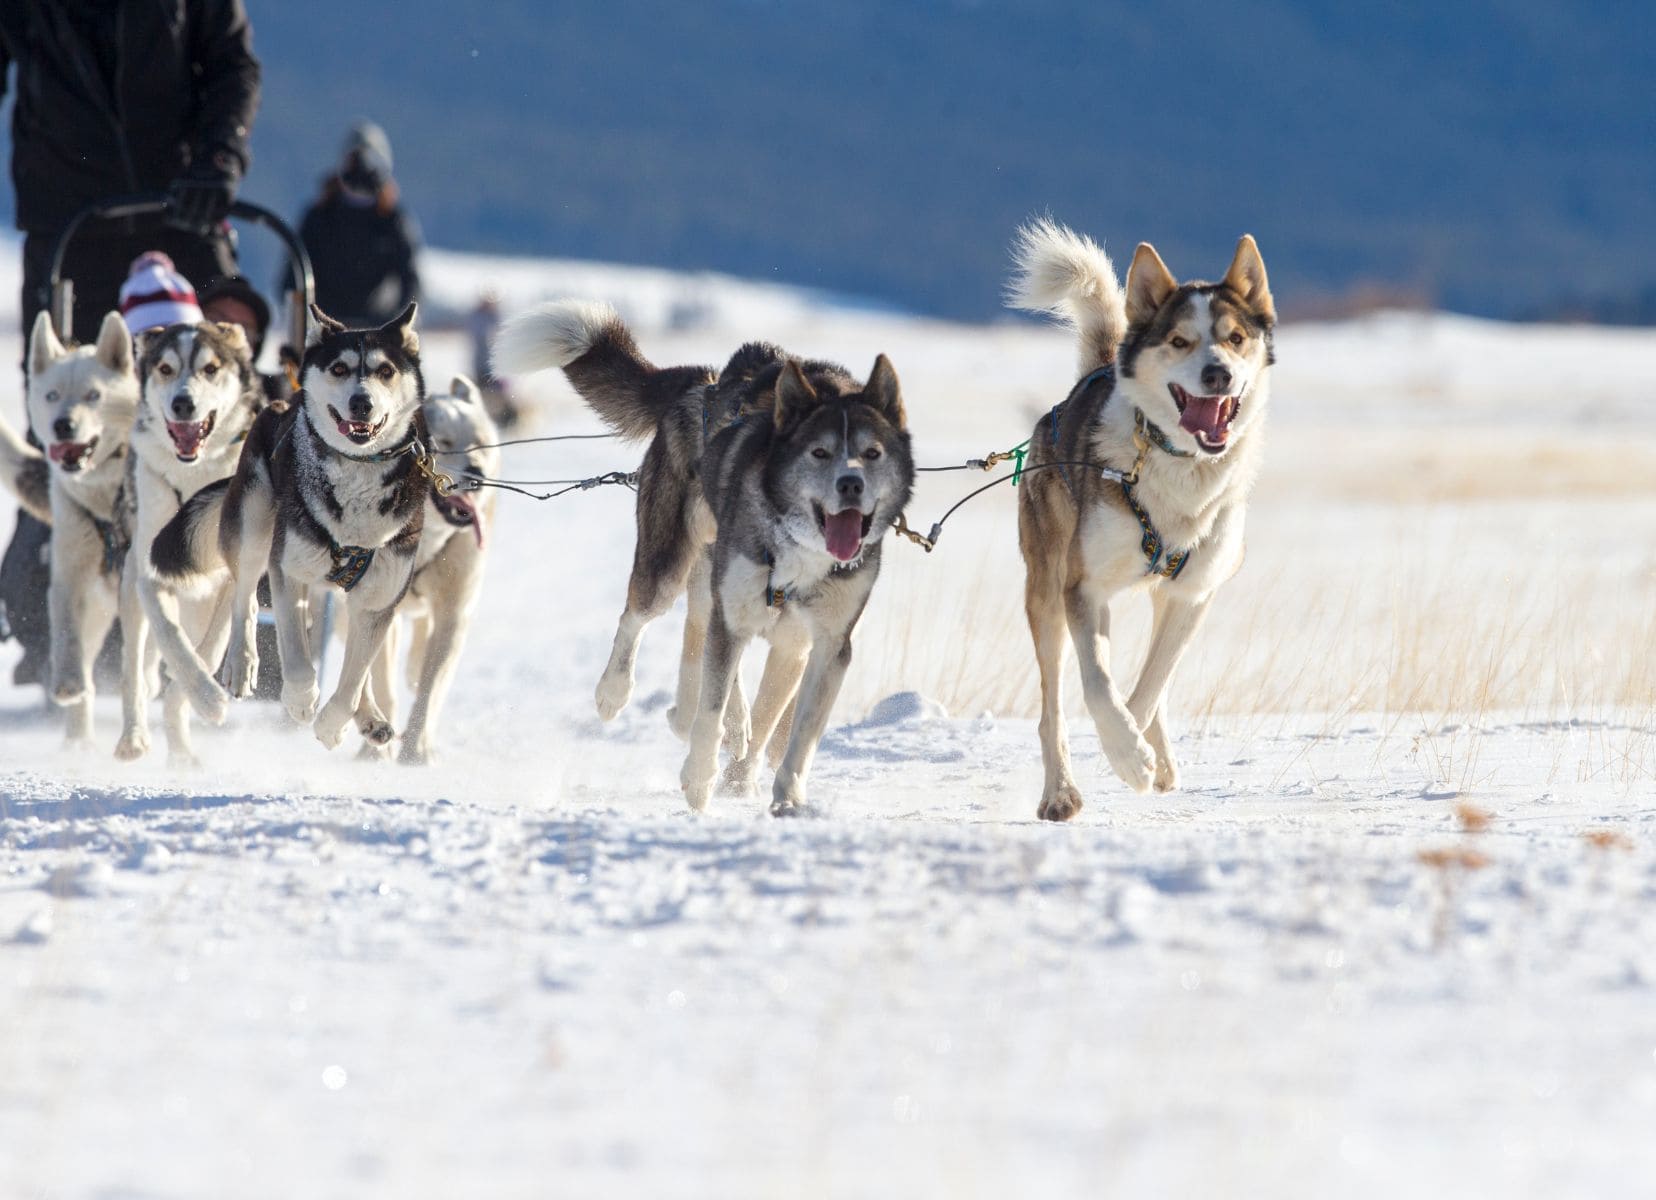 husky dogs pulling a sleigh in the snow